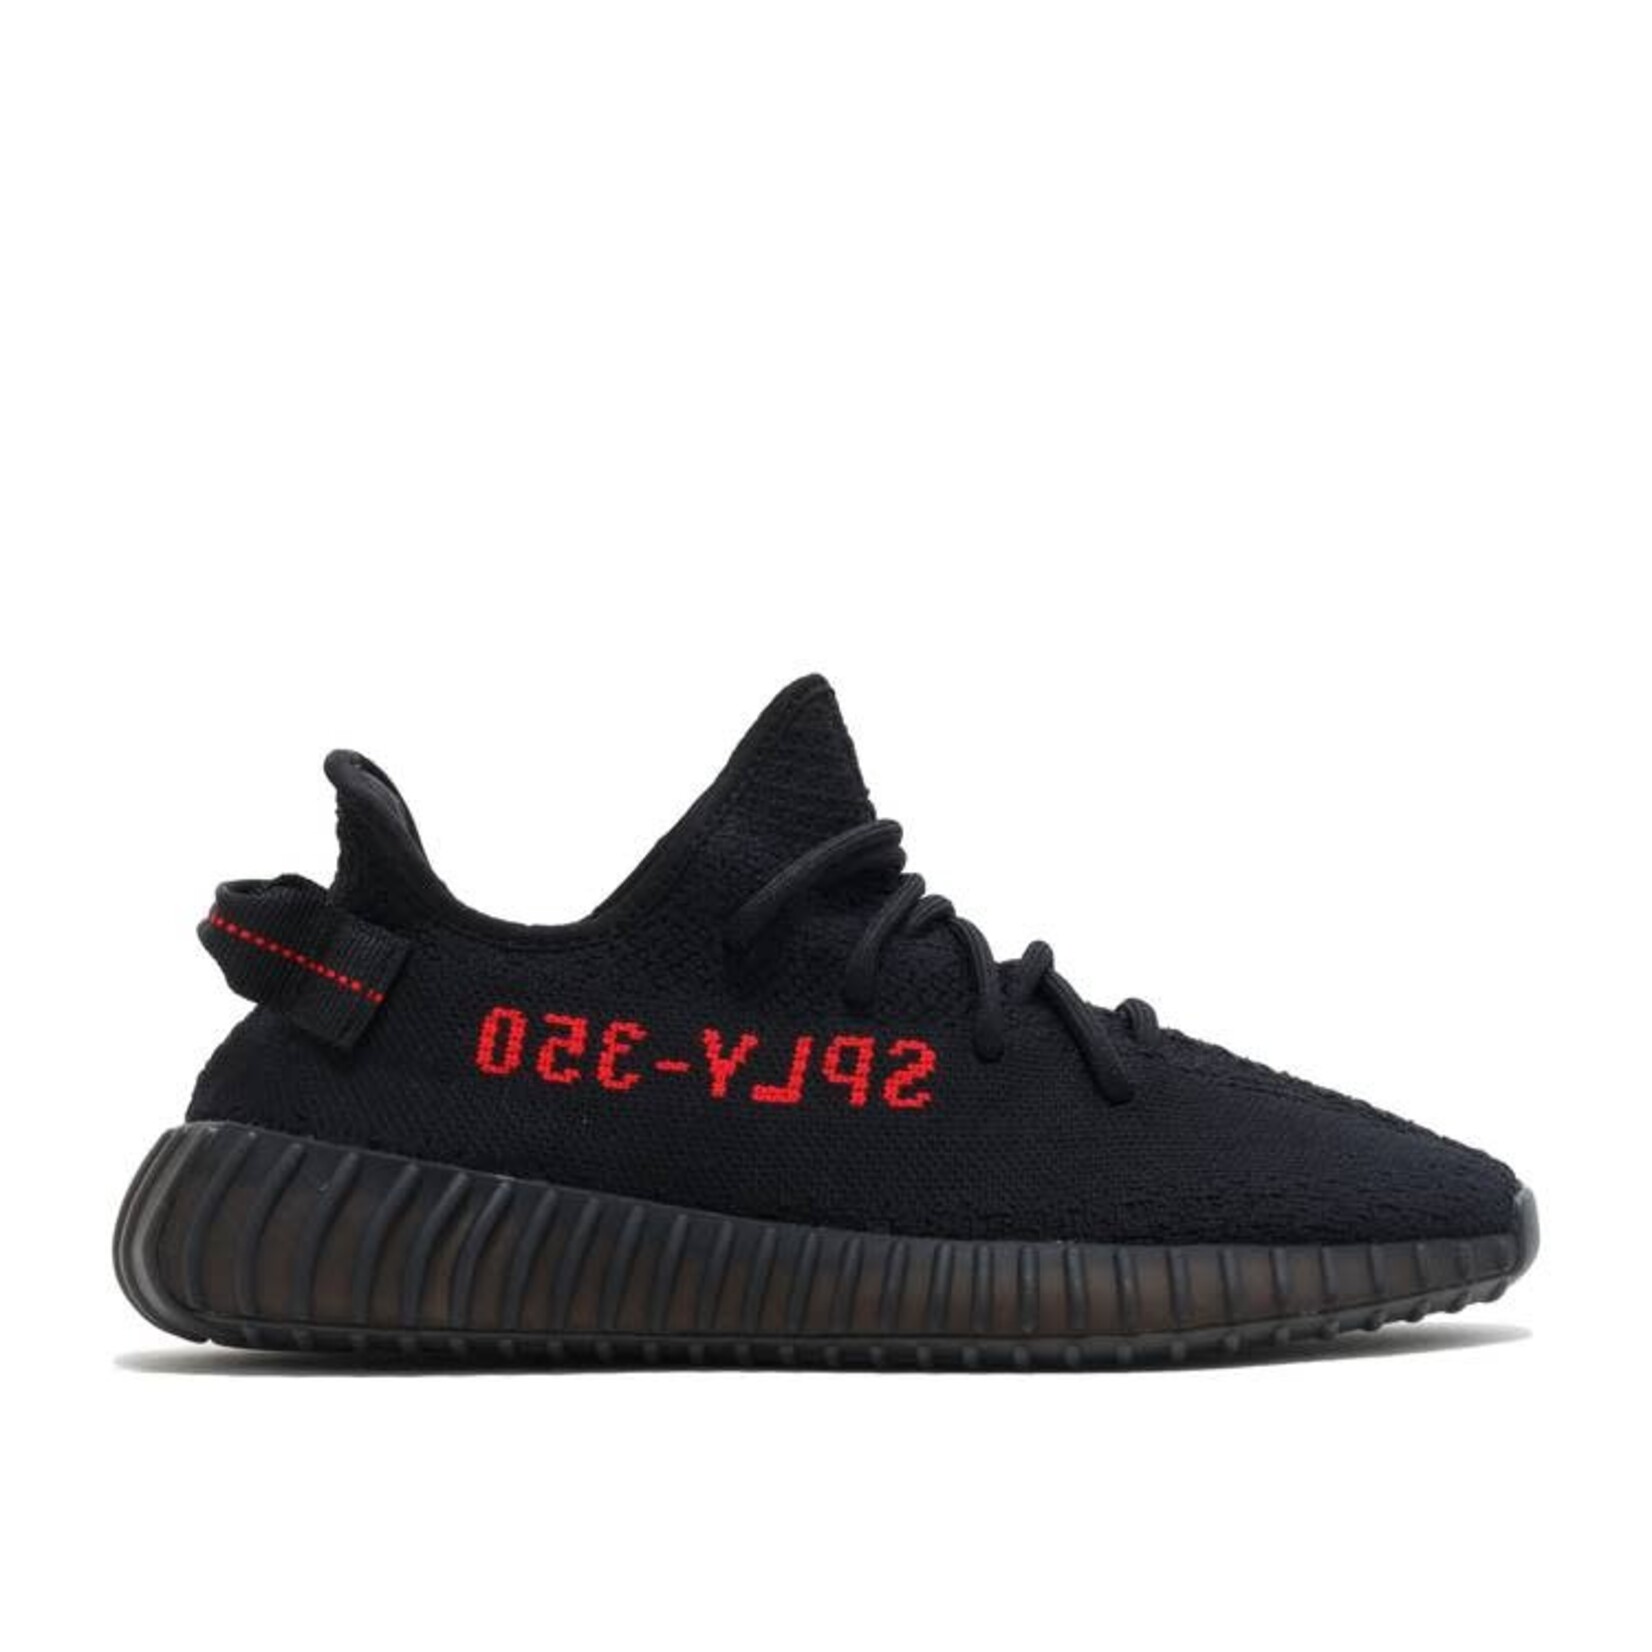 Adidas adidas Yeezy Boost 350 V2 Black Red (2017/2020) Size 11, DS BRAND NEW